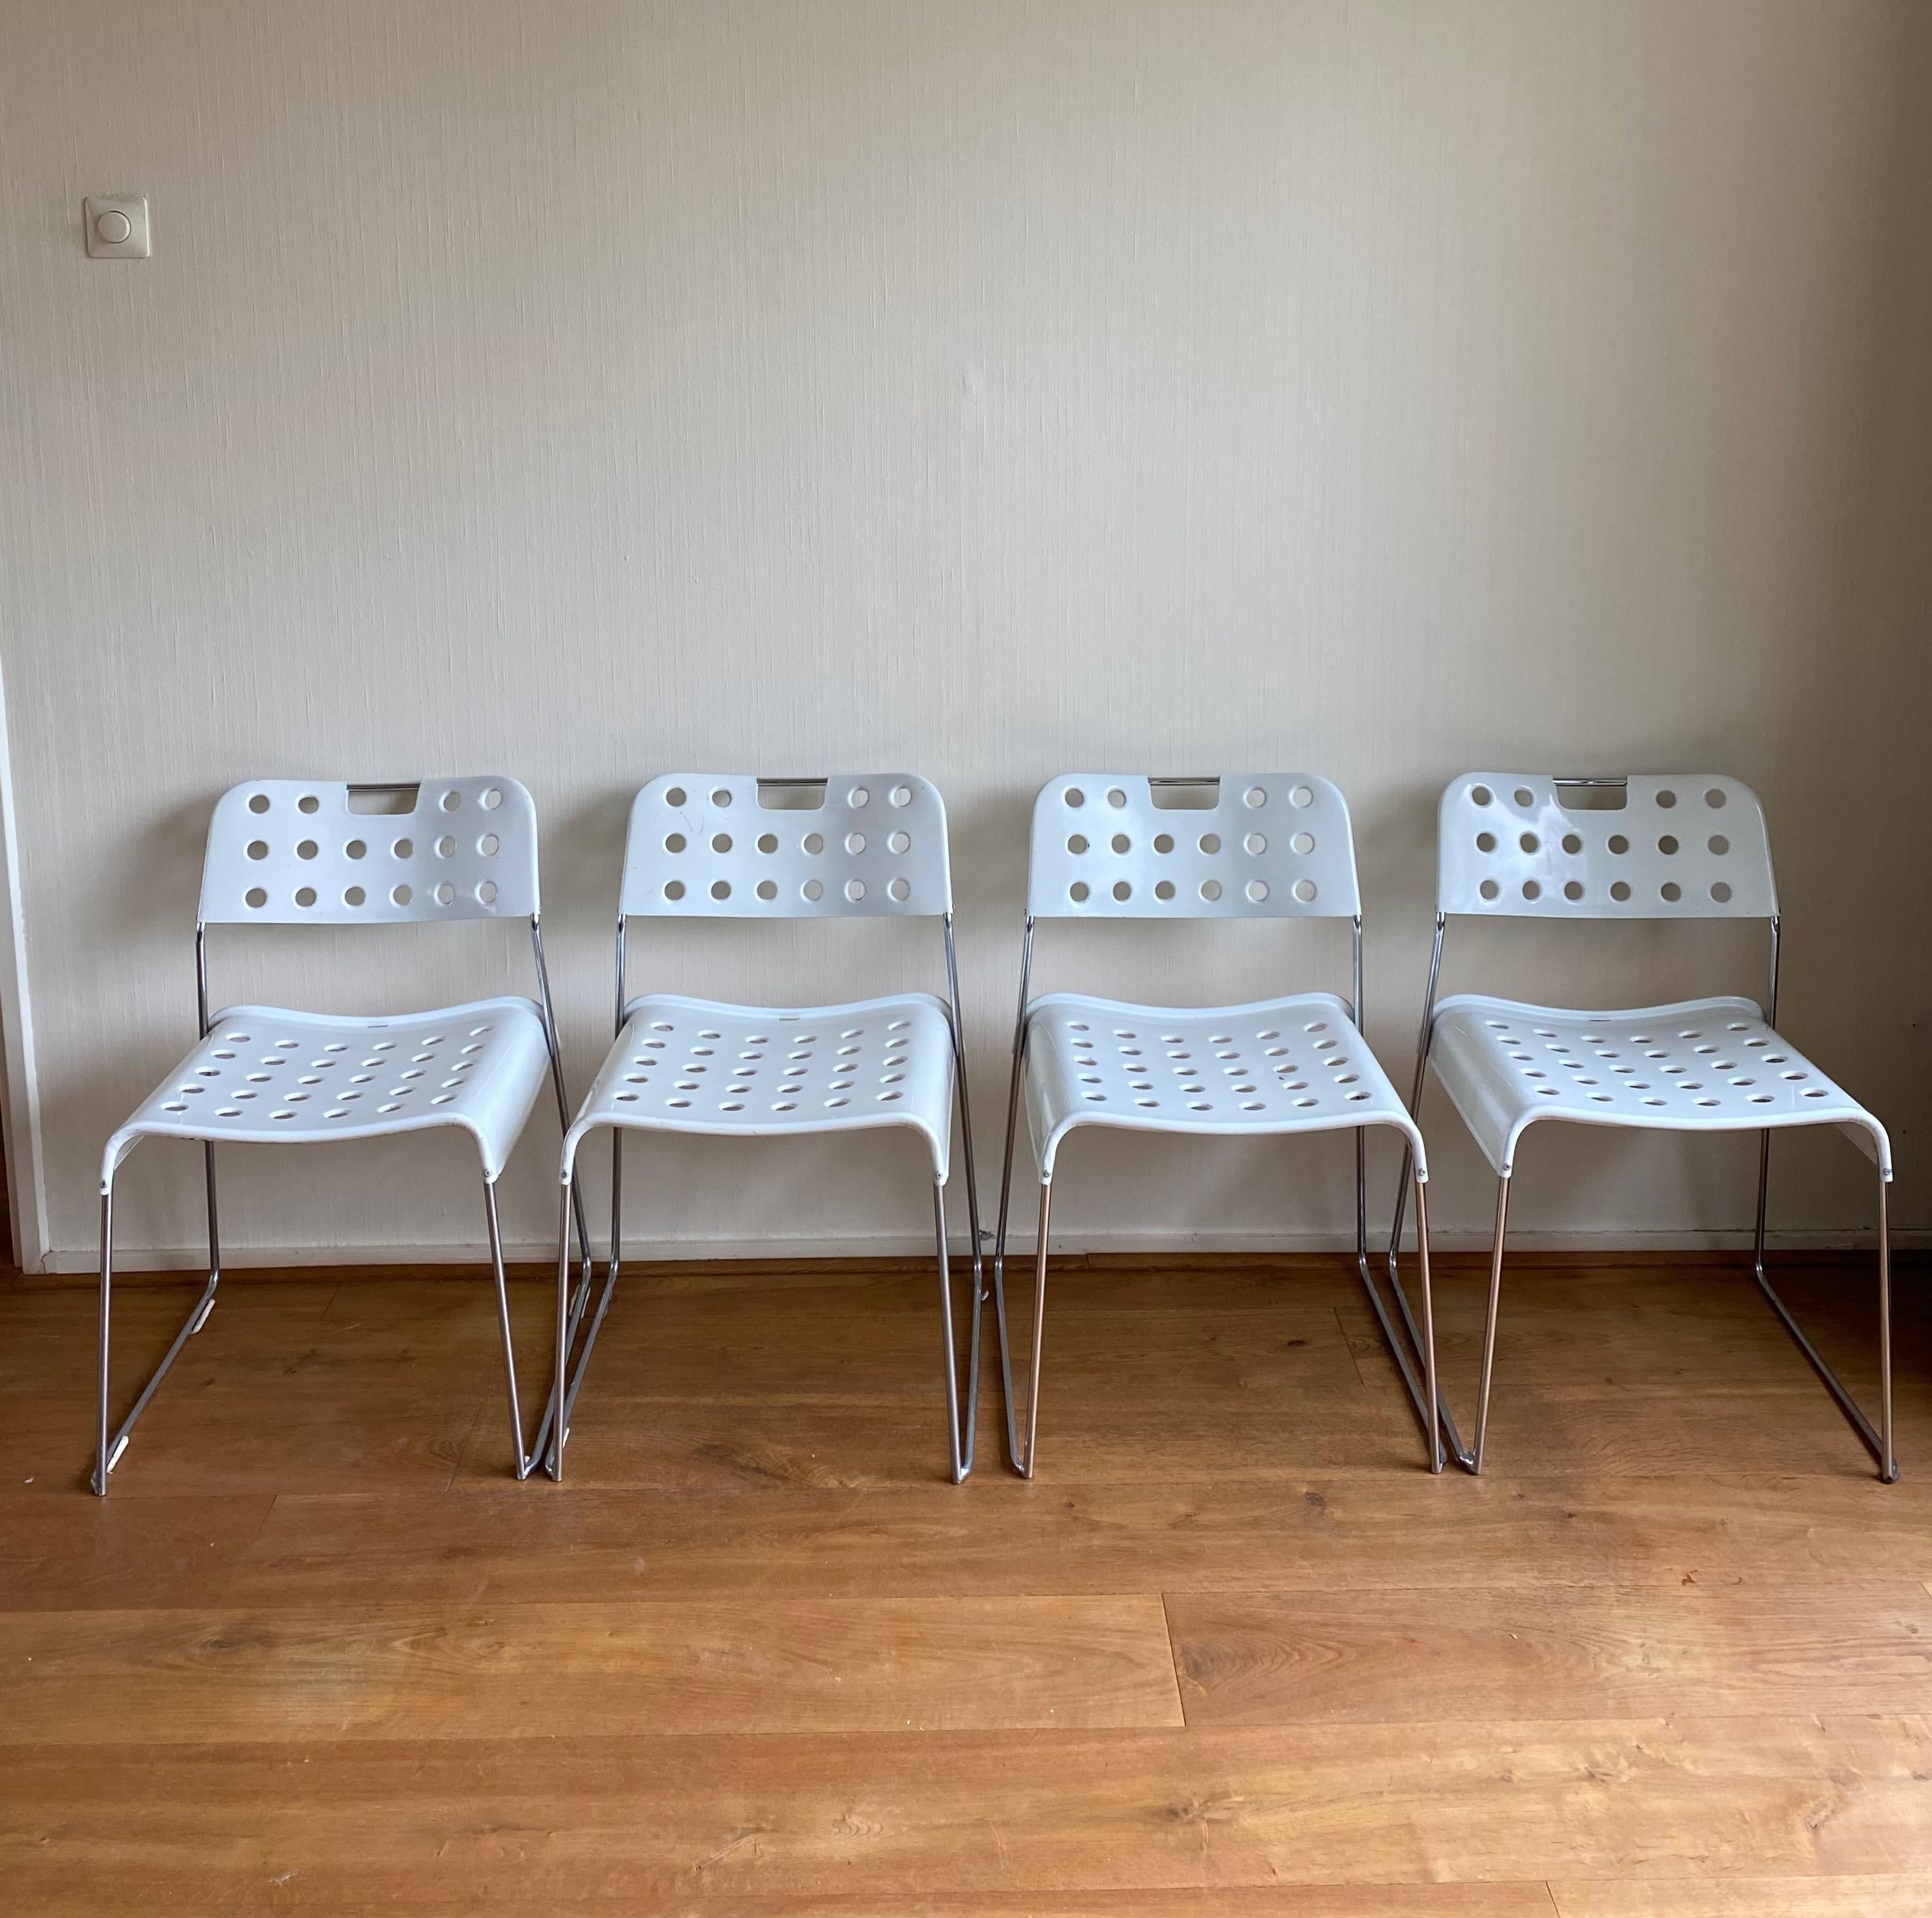 Set of four white chairs, Model Omkstak, Designed by Rodney Kinsman for Bieffeplast Italy. The chairs feature a Peforated Metal Base With Chromed feet. Very nice and uncommon Italian Design. The chairs show some wear, consisting with age and use